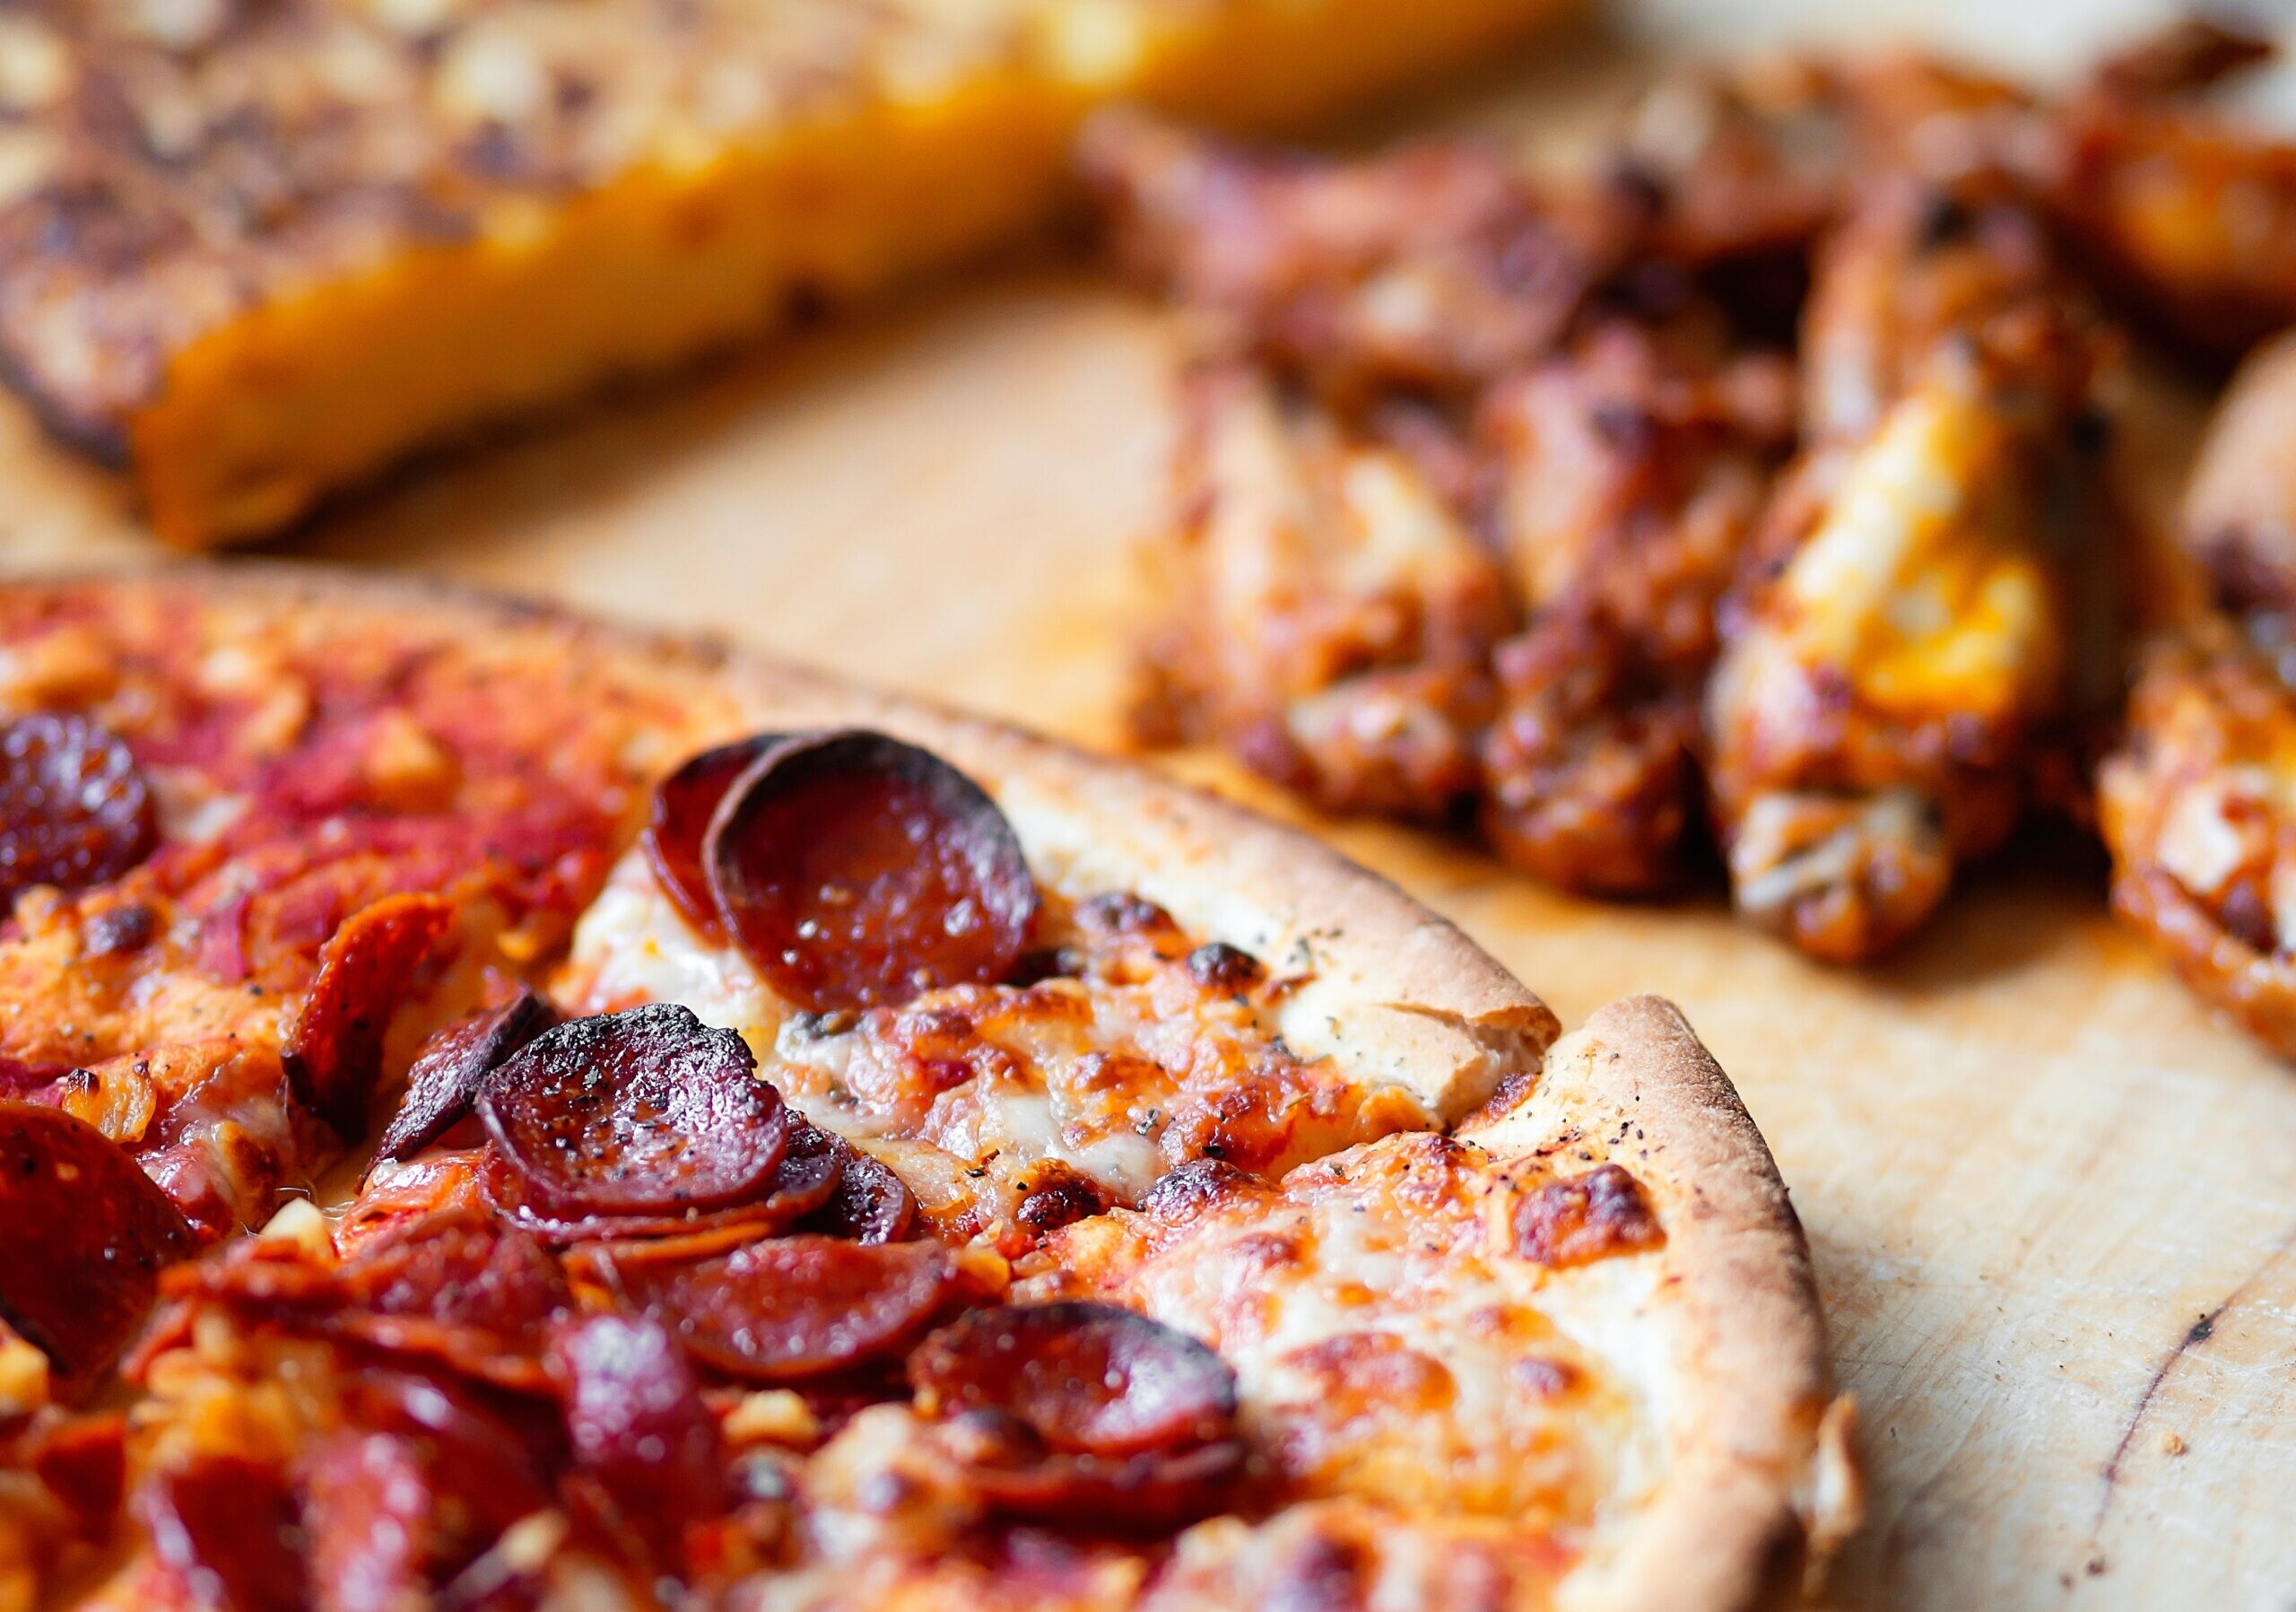 Texas Pizza Franchise for Sale by the Restaurant Broker at EATS Broker